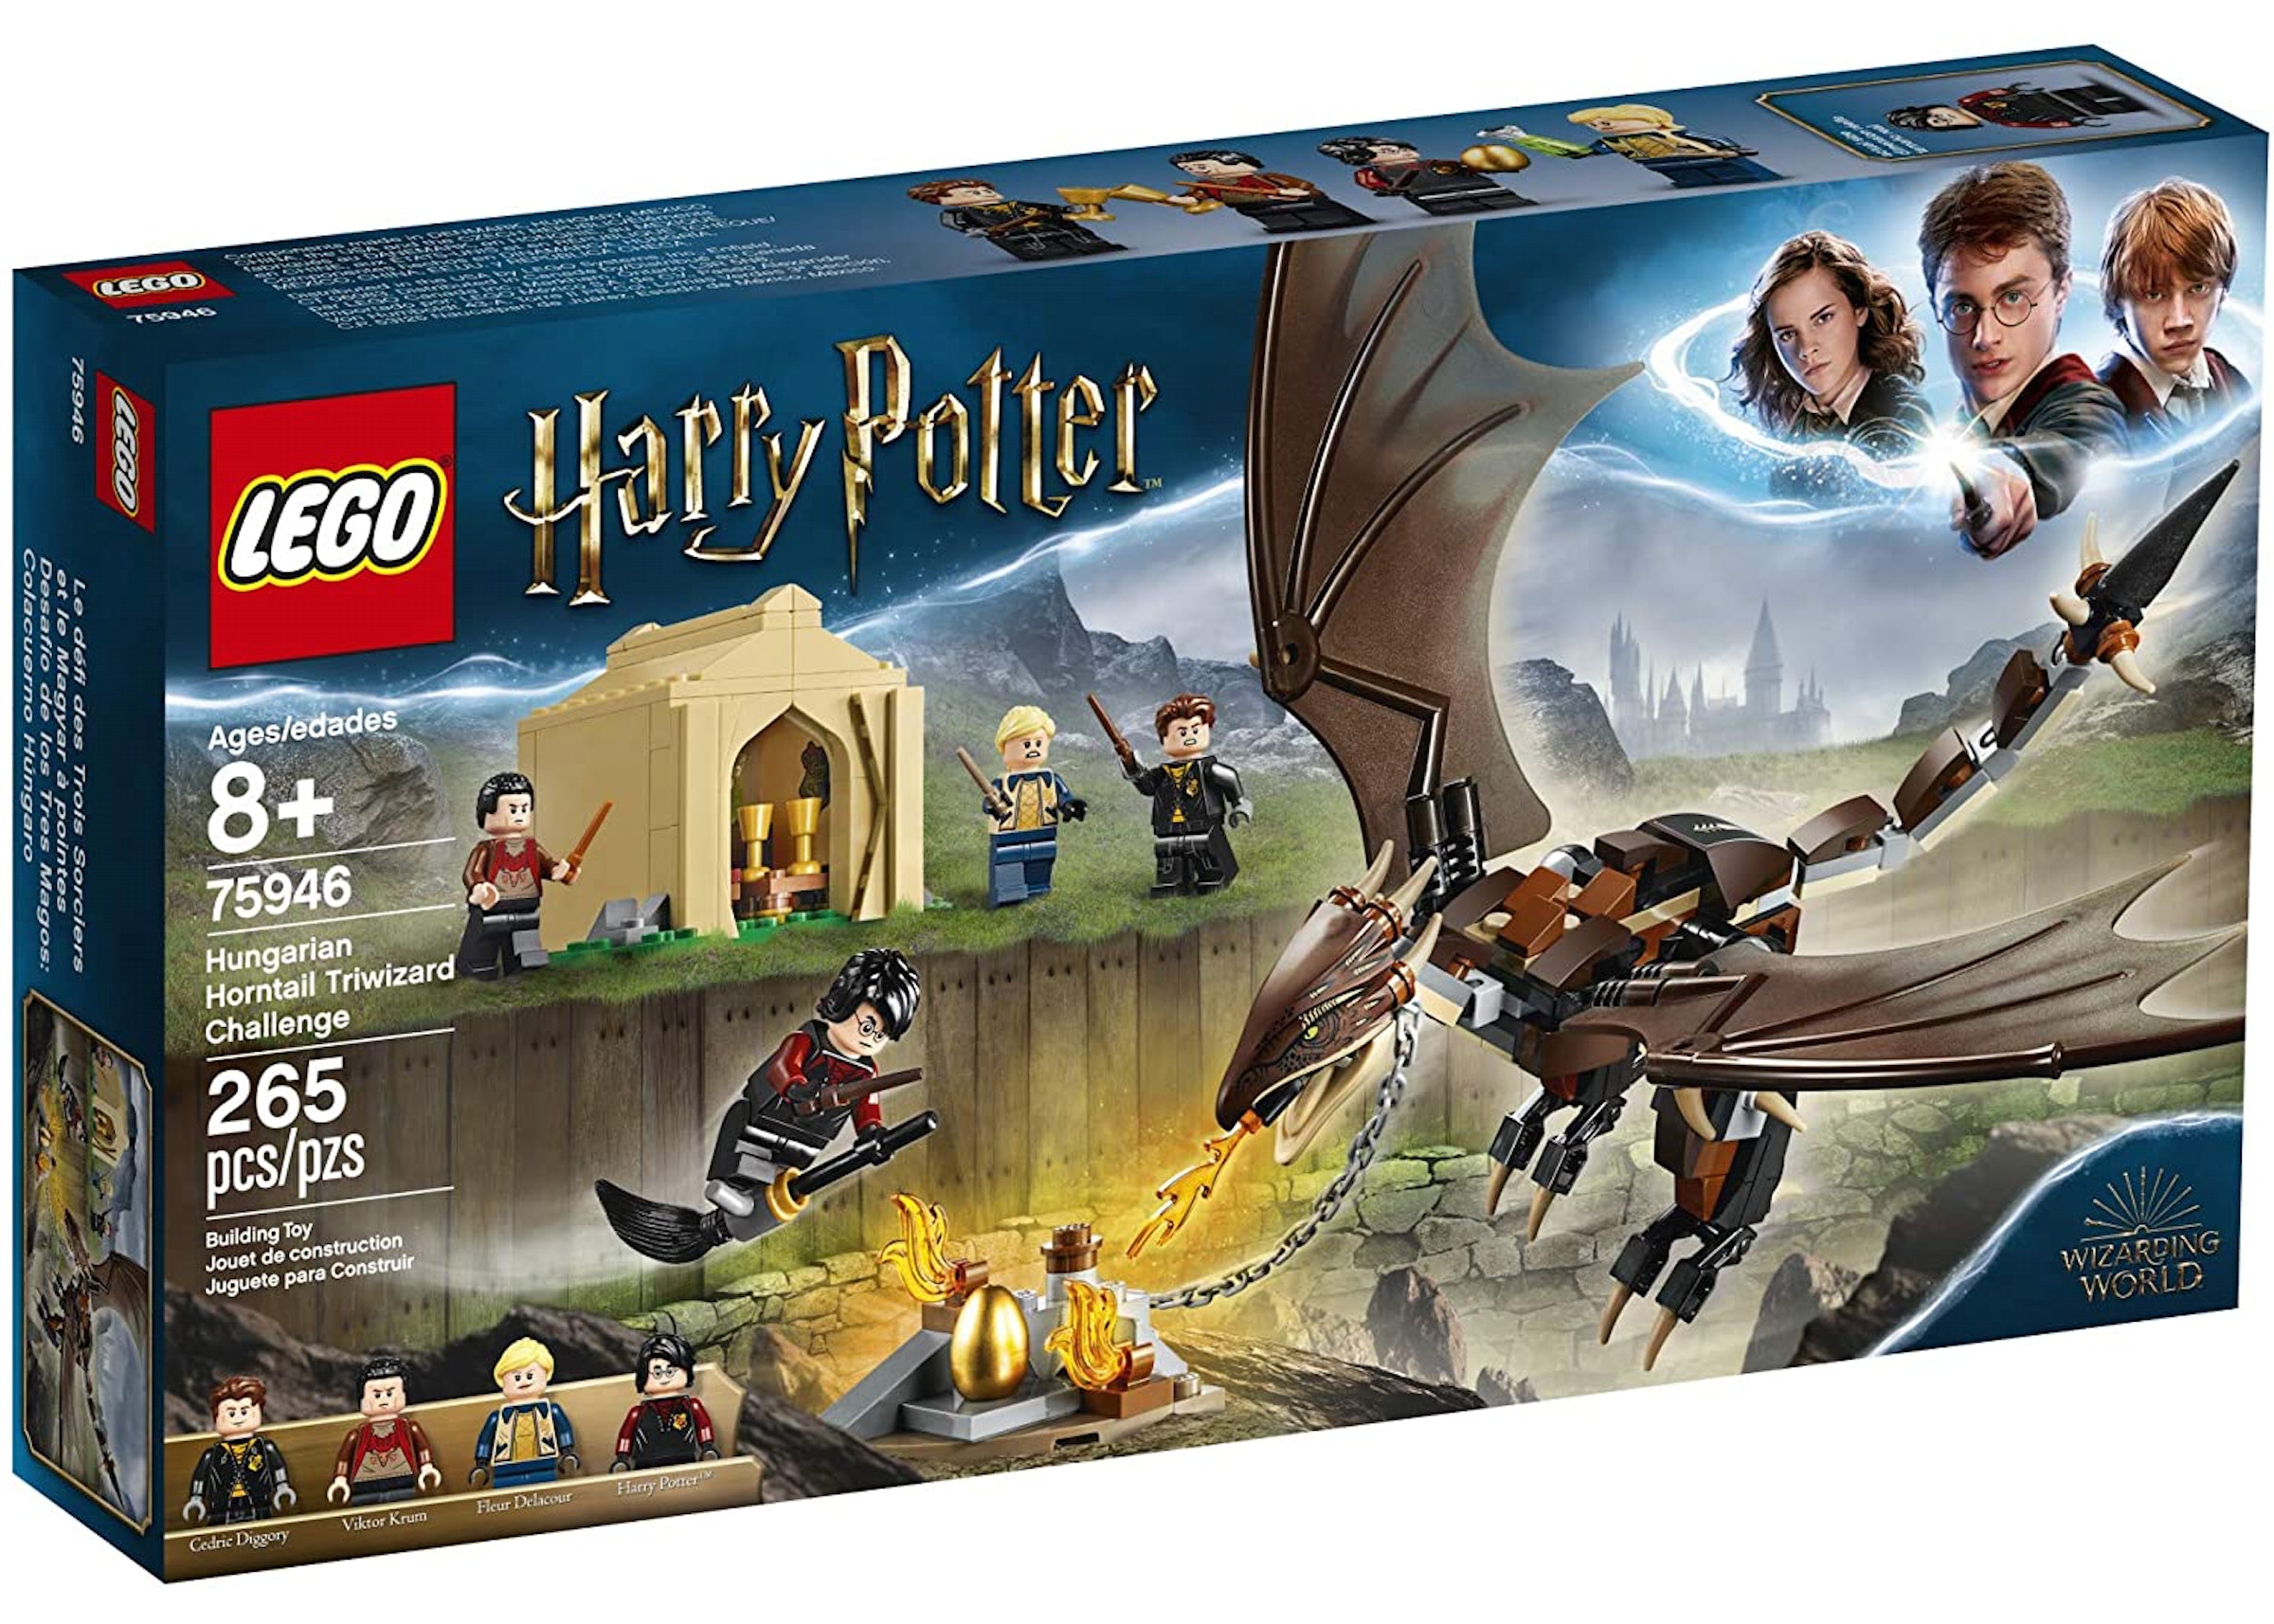 Alaska ponerse nervioso Cereal LEGO Harry Potter and The Goblet of Fire Hungarian Horntail Triwizard  Challenge Set 75946 - US